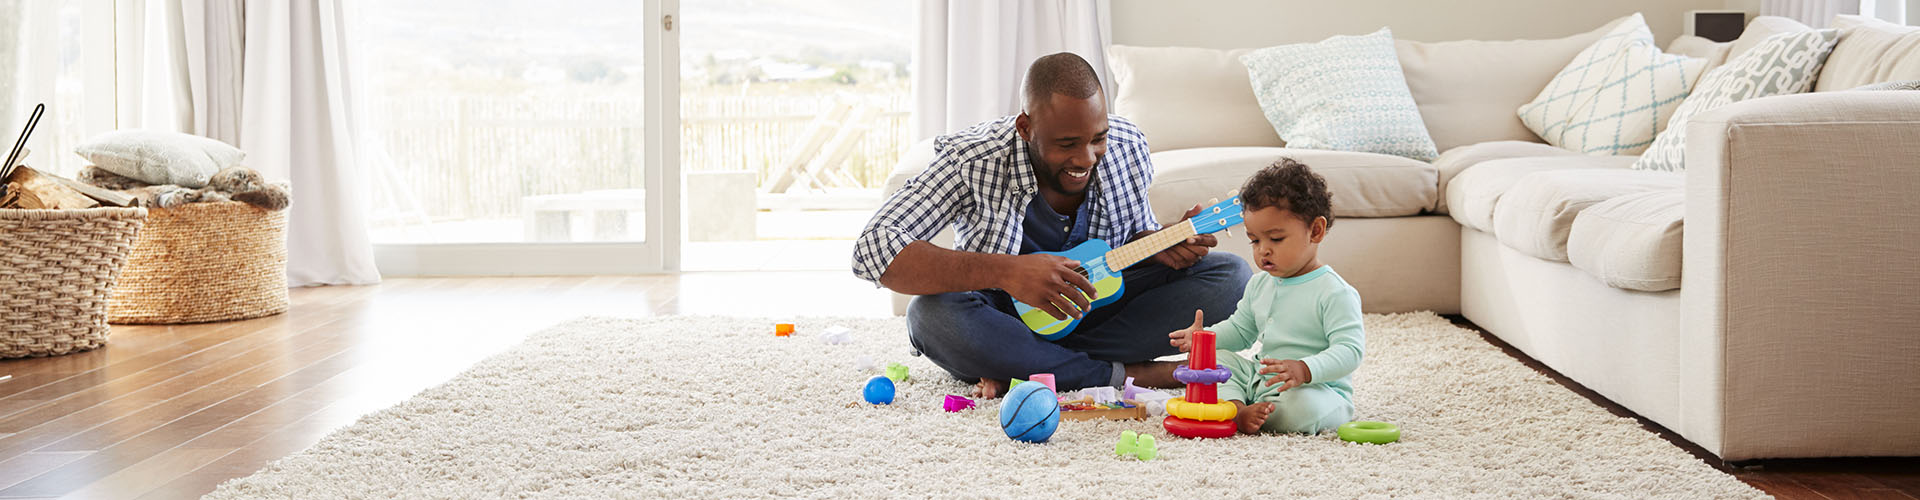 Black father playing with toddler on the living room floor